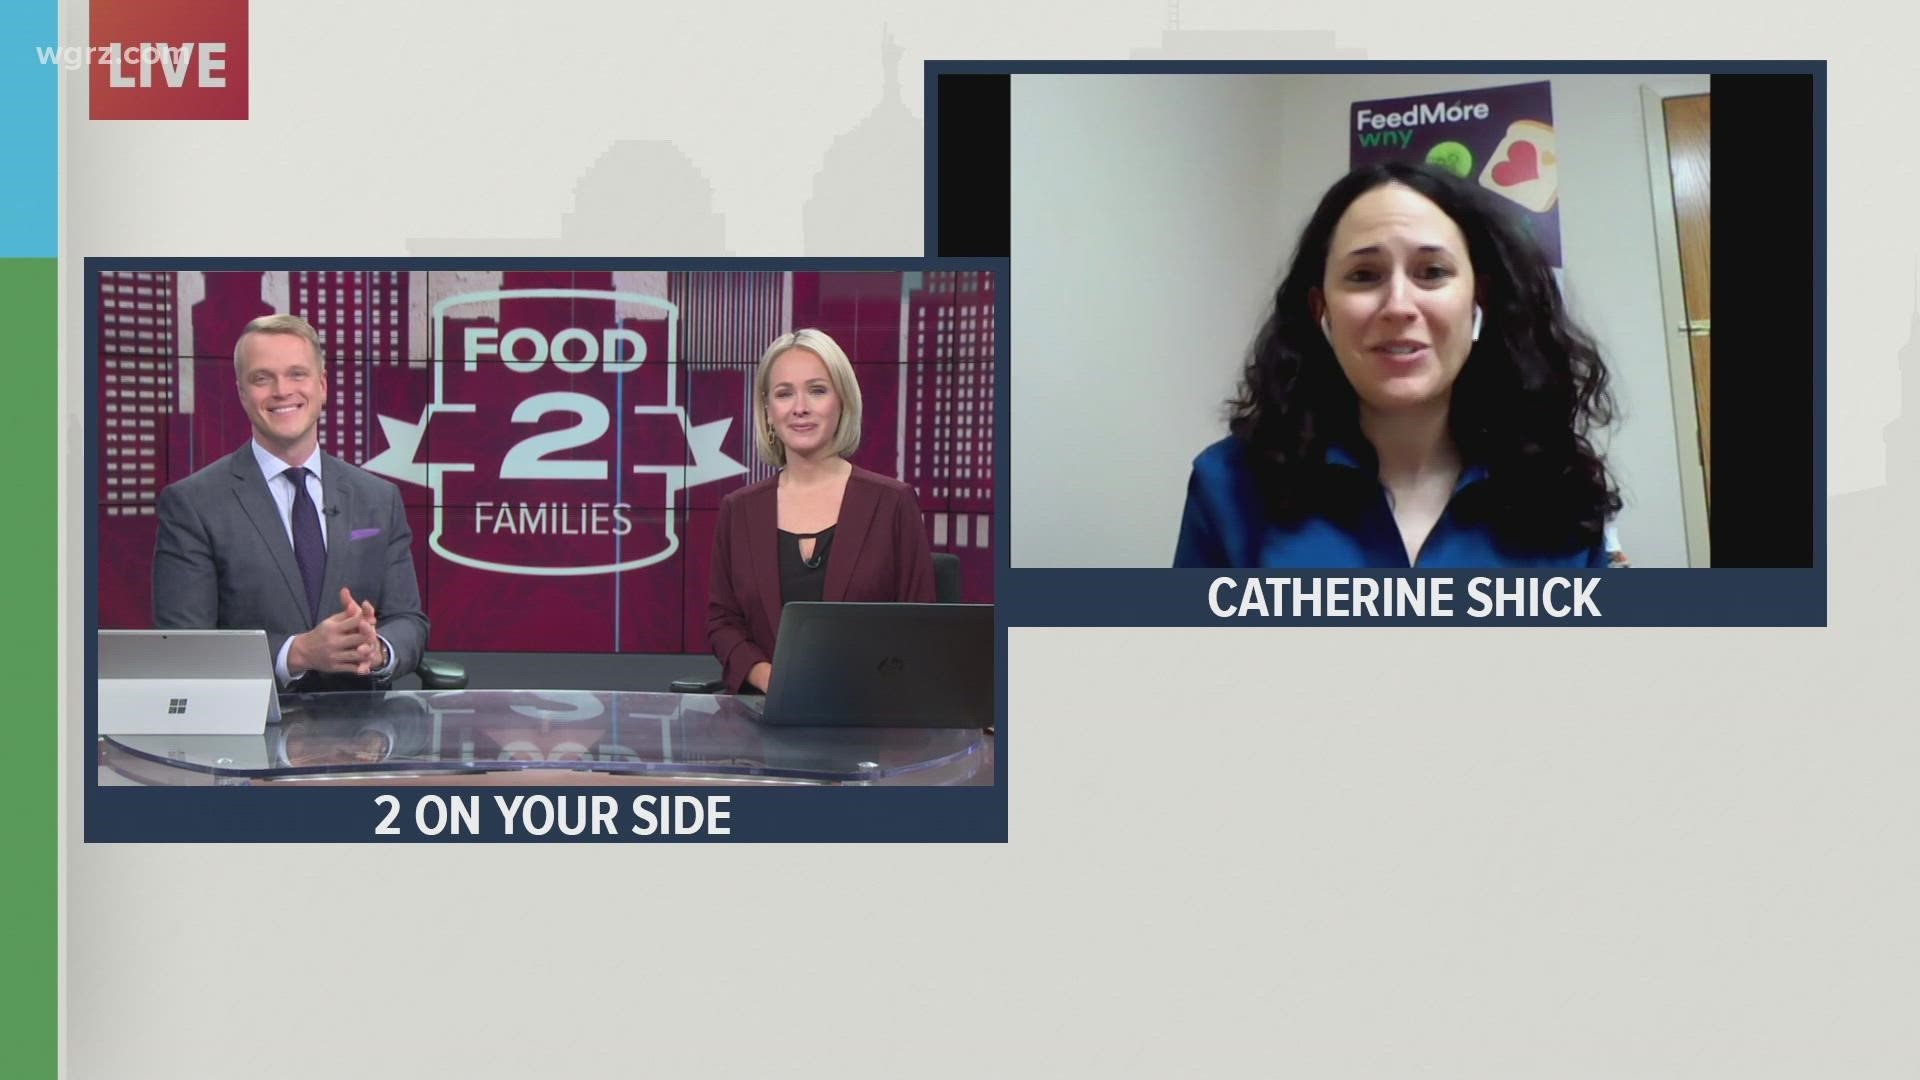 Catherine Shick, the chief communications officer for FeedMore Western New York, joined our Town Hall to discuss the Food 2 Families drive.